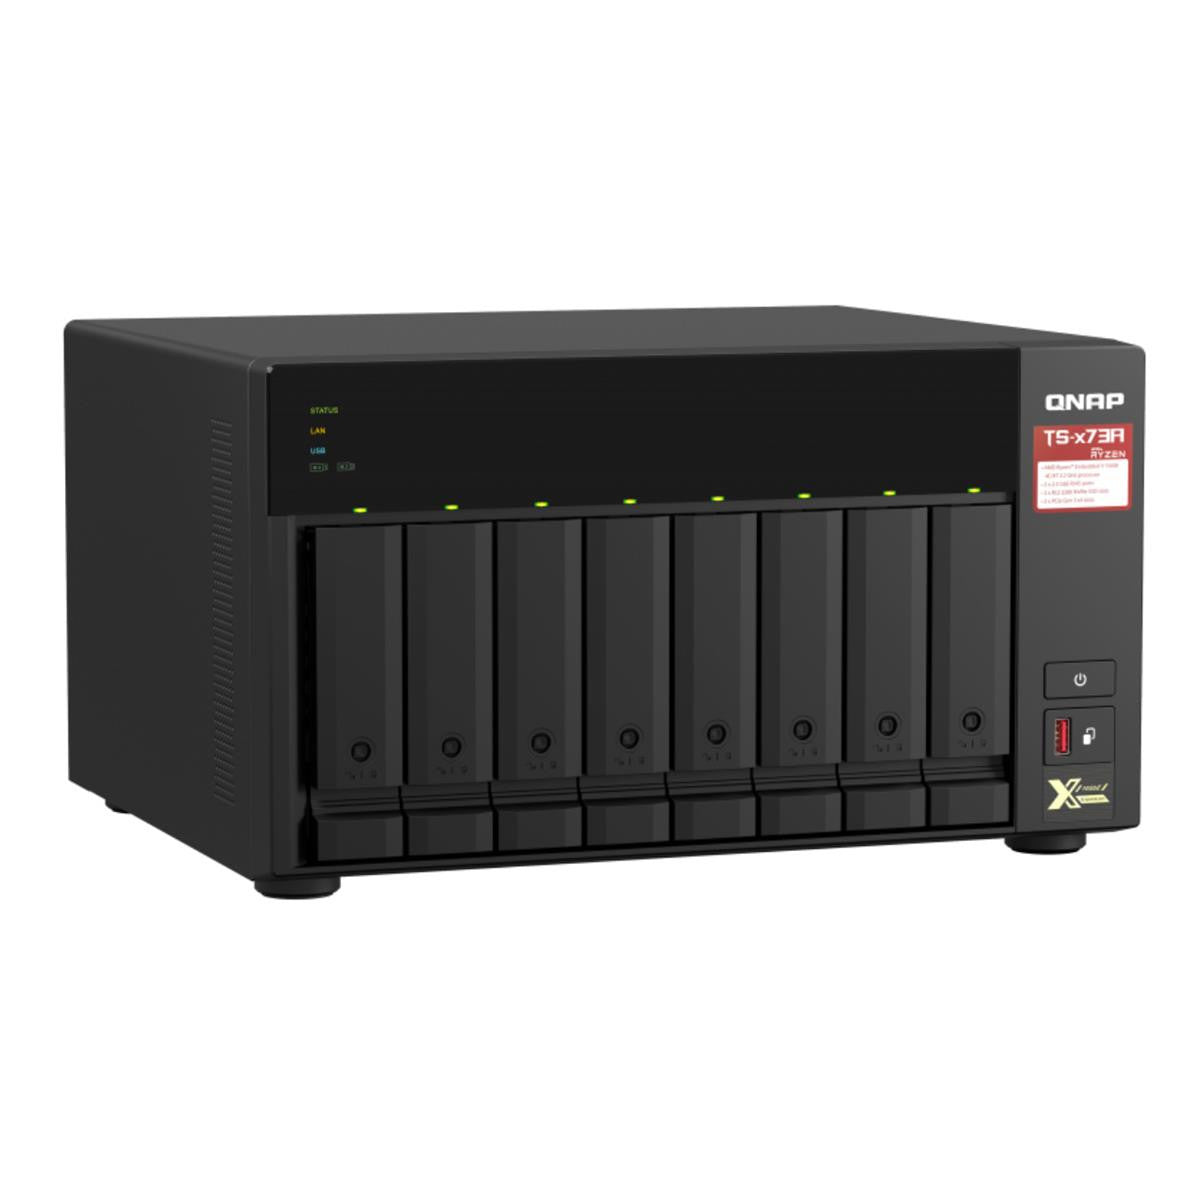 QNAP TS-873A 8-BAY NAS with 64GB DDR4 RAM and 96TB (8x12TB) Seagate Ironwolf NAS Drives Fully Assembled and Tested